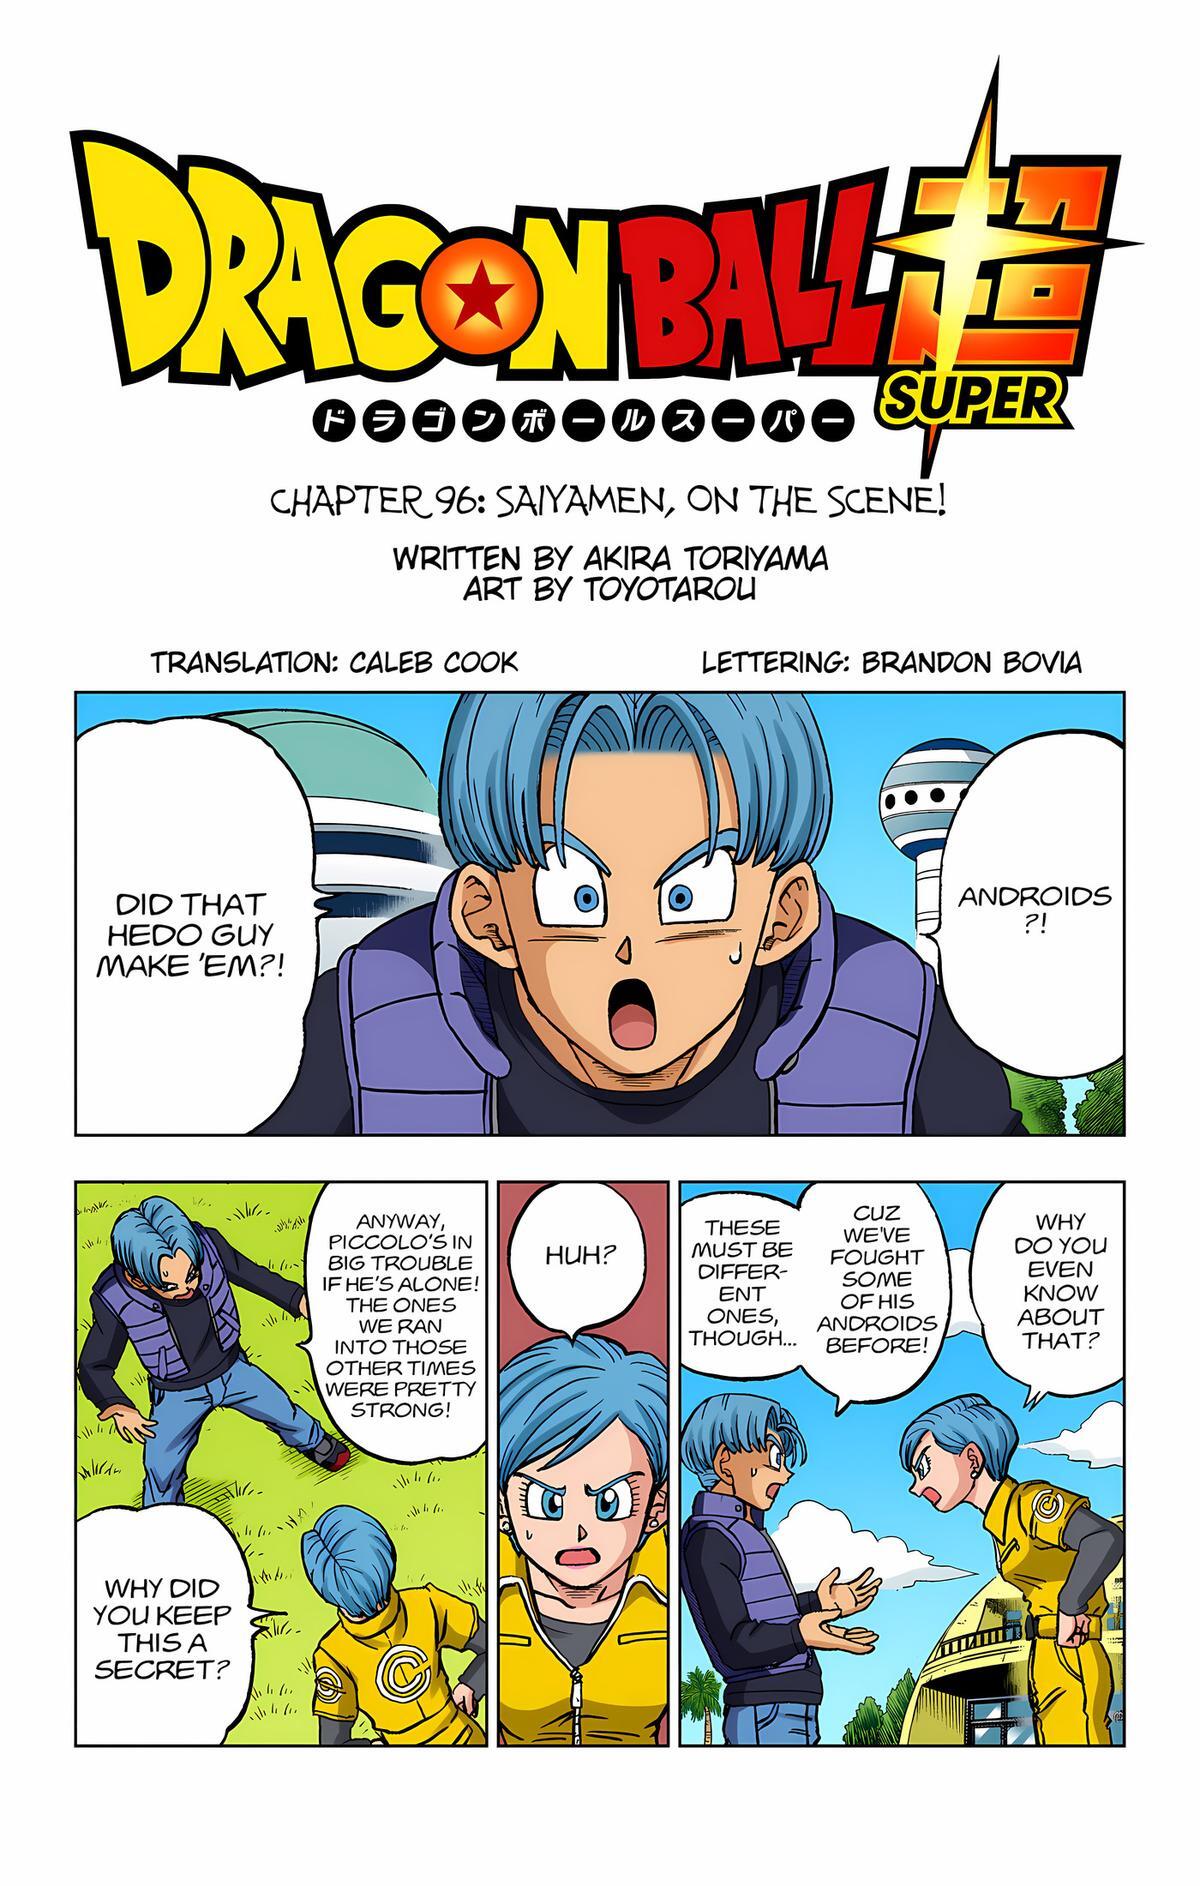 Dragon Ball Super Chapter 99 Discussion - Forums 